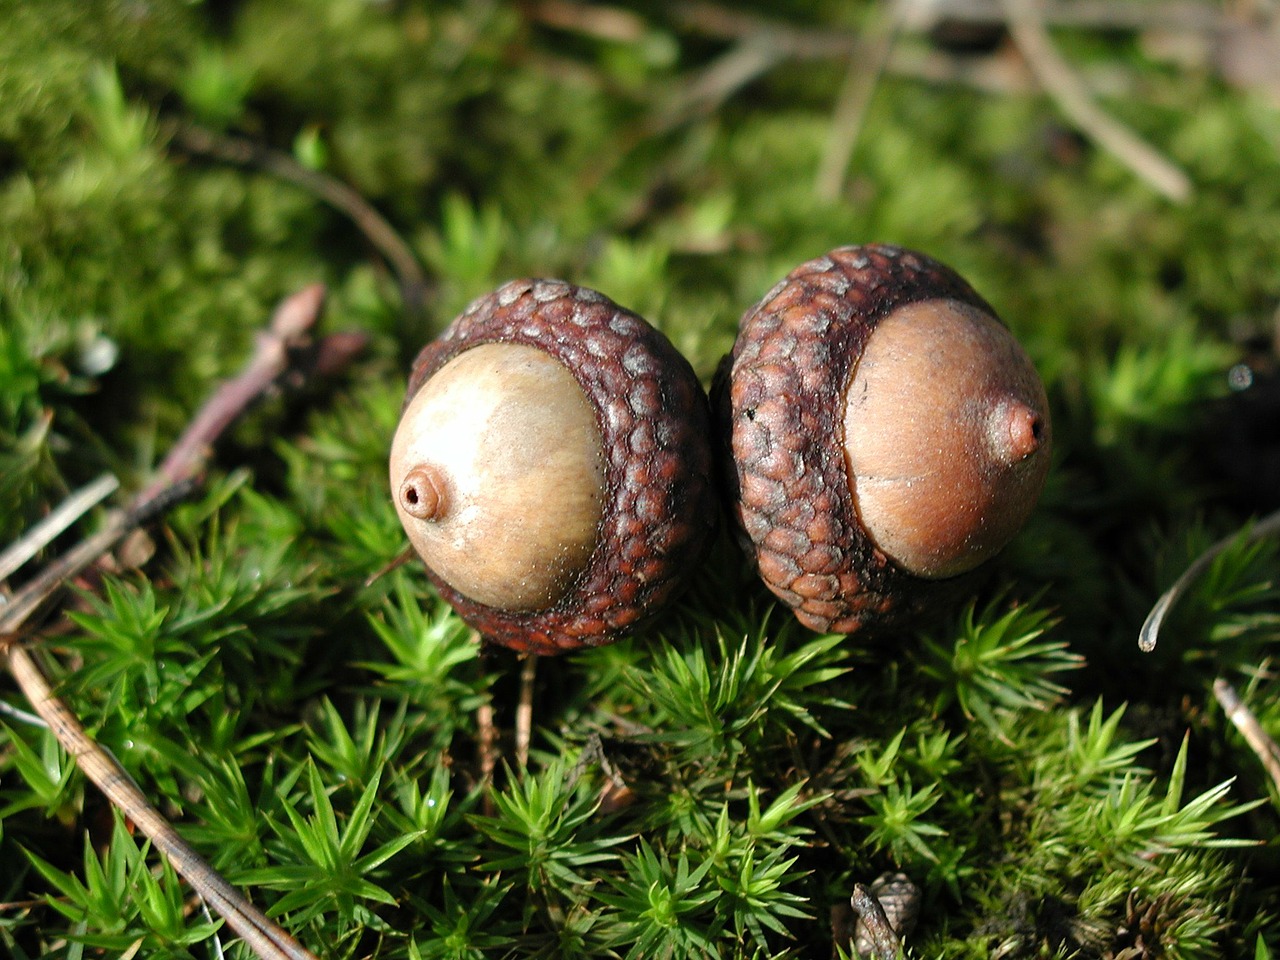 acorns,seeds,cores,forest,nature,environment,free pictures, free photos, free images, royalty free, free illustrations, public domain